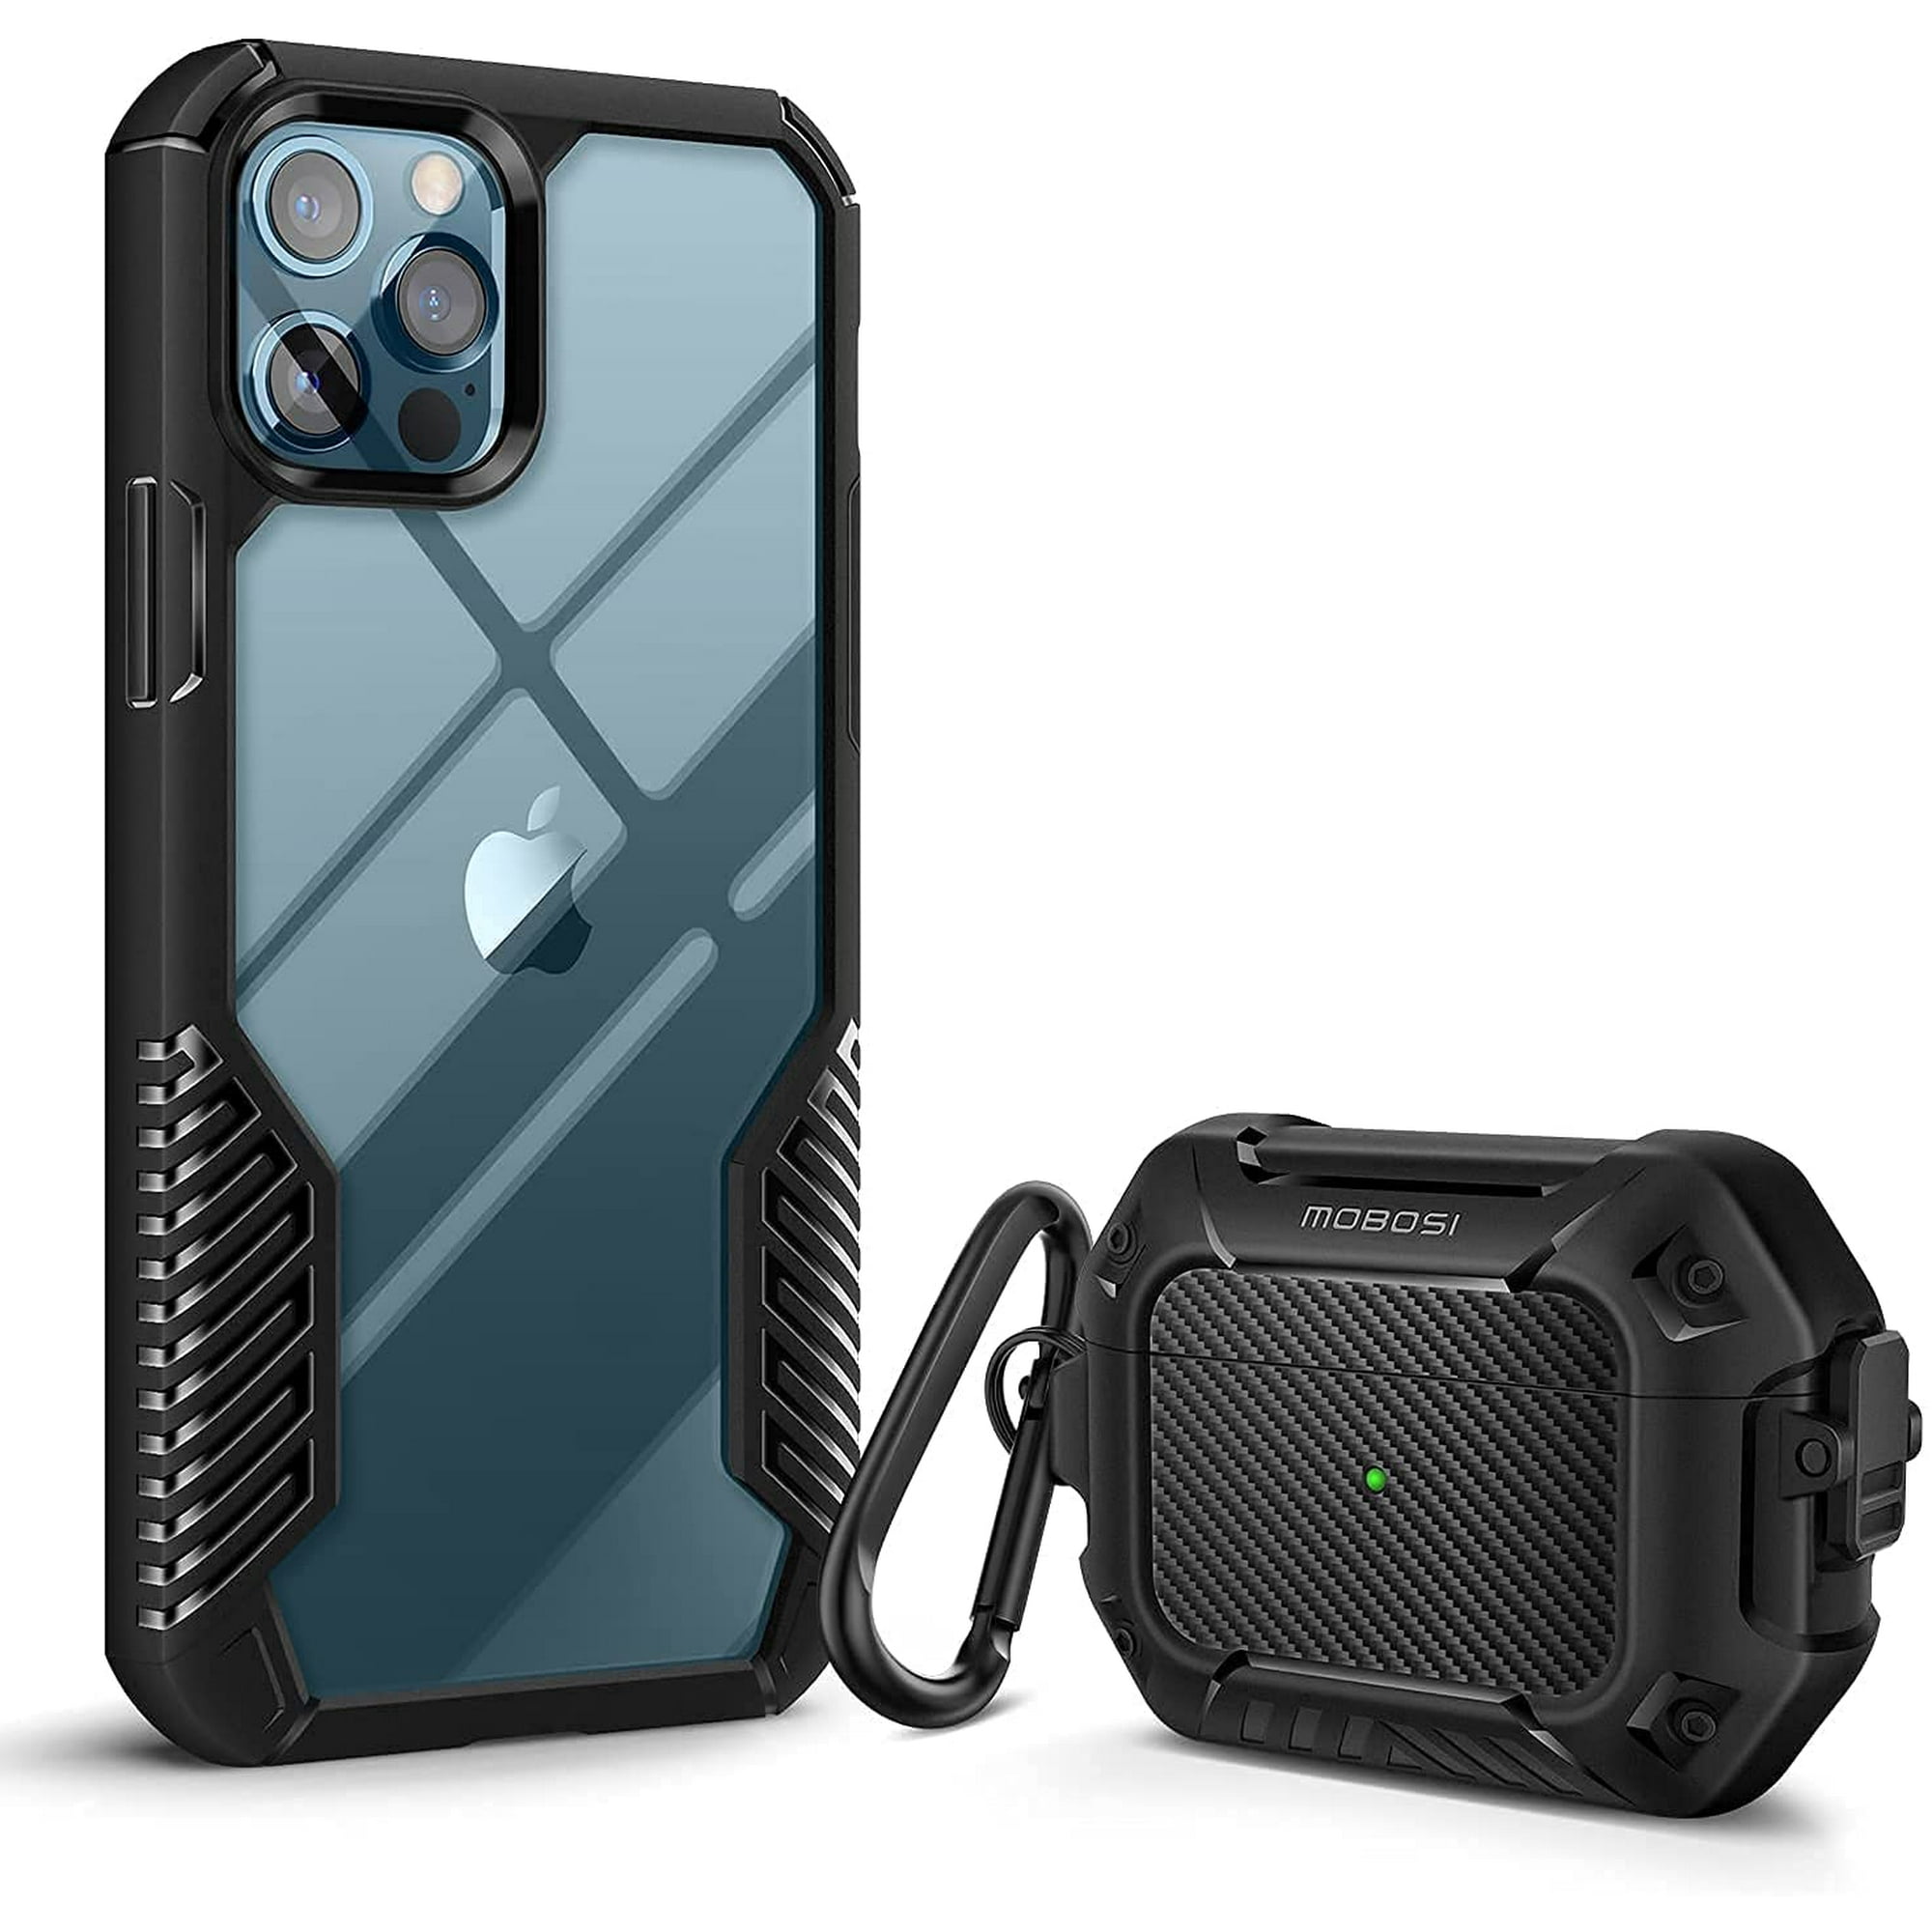 Bundle] AIMTYD Vanguard Armor Compatible with iPhone 12 Pro Max Case 6.7  Inch & AirPod Case for Airpods Pro Case Cover (Black)(2 Items Bundle) |  Walmart Canada